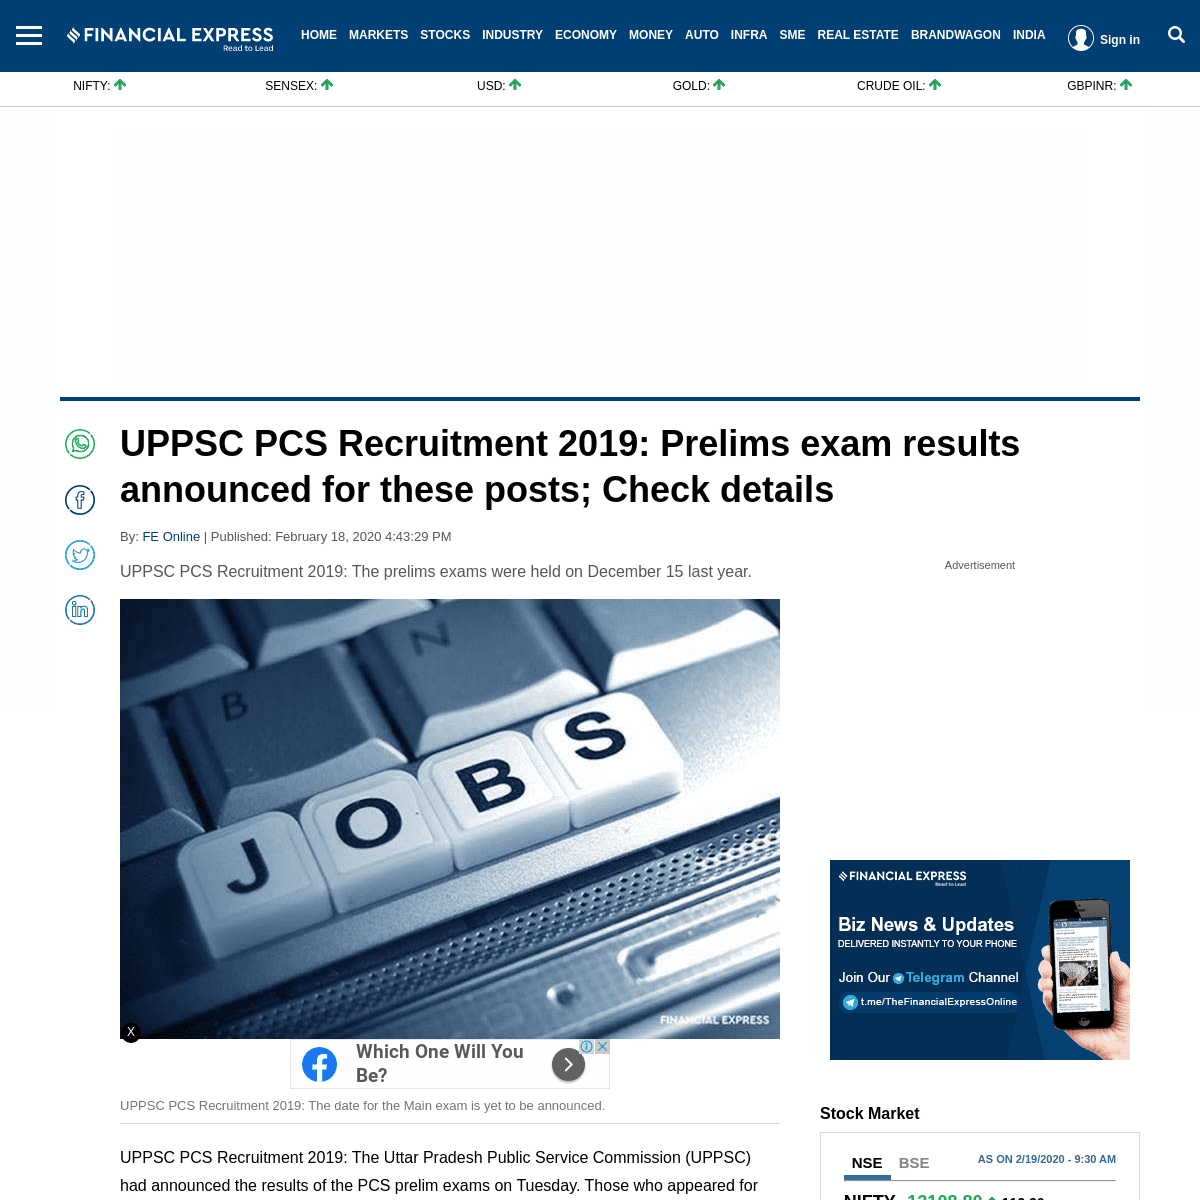 A complete backup of www.financialexpress.com/jobs/uppsc-pcs-recruitment-2019-prelims-exam-results-announced-for-these-posts-che